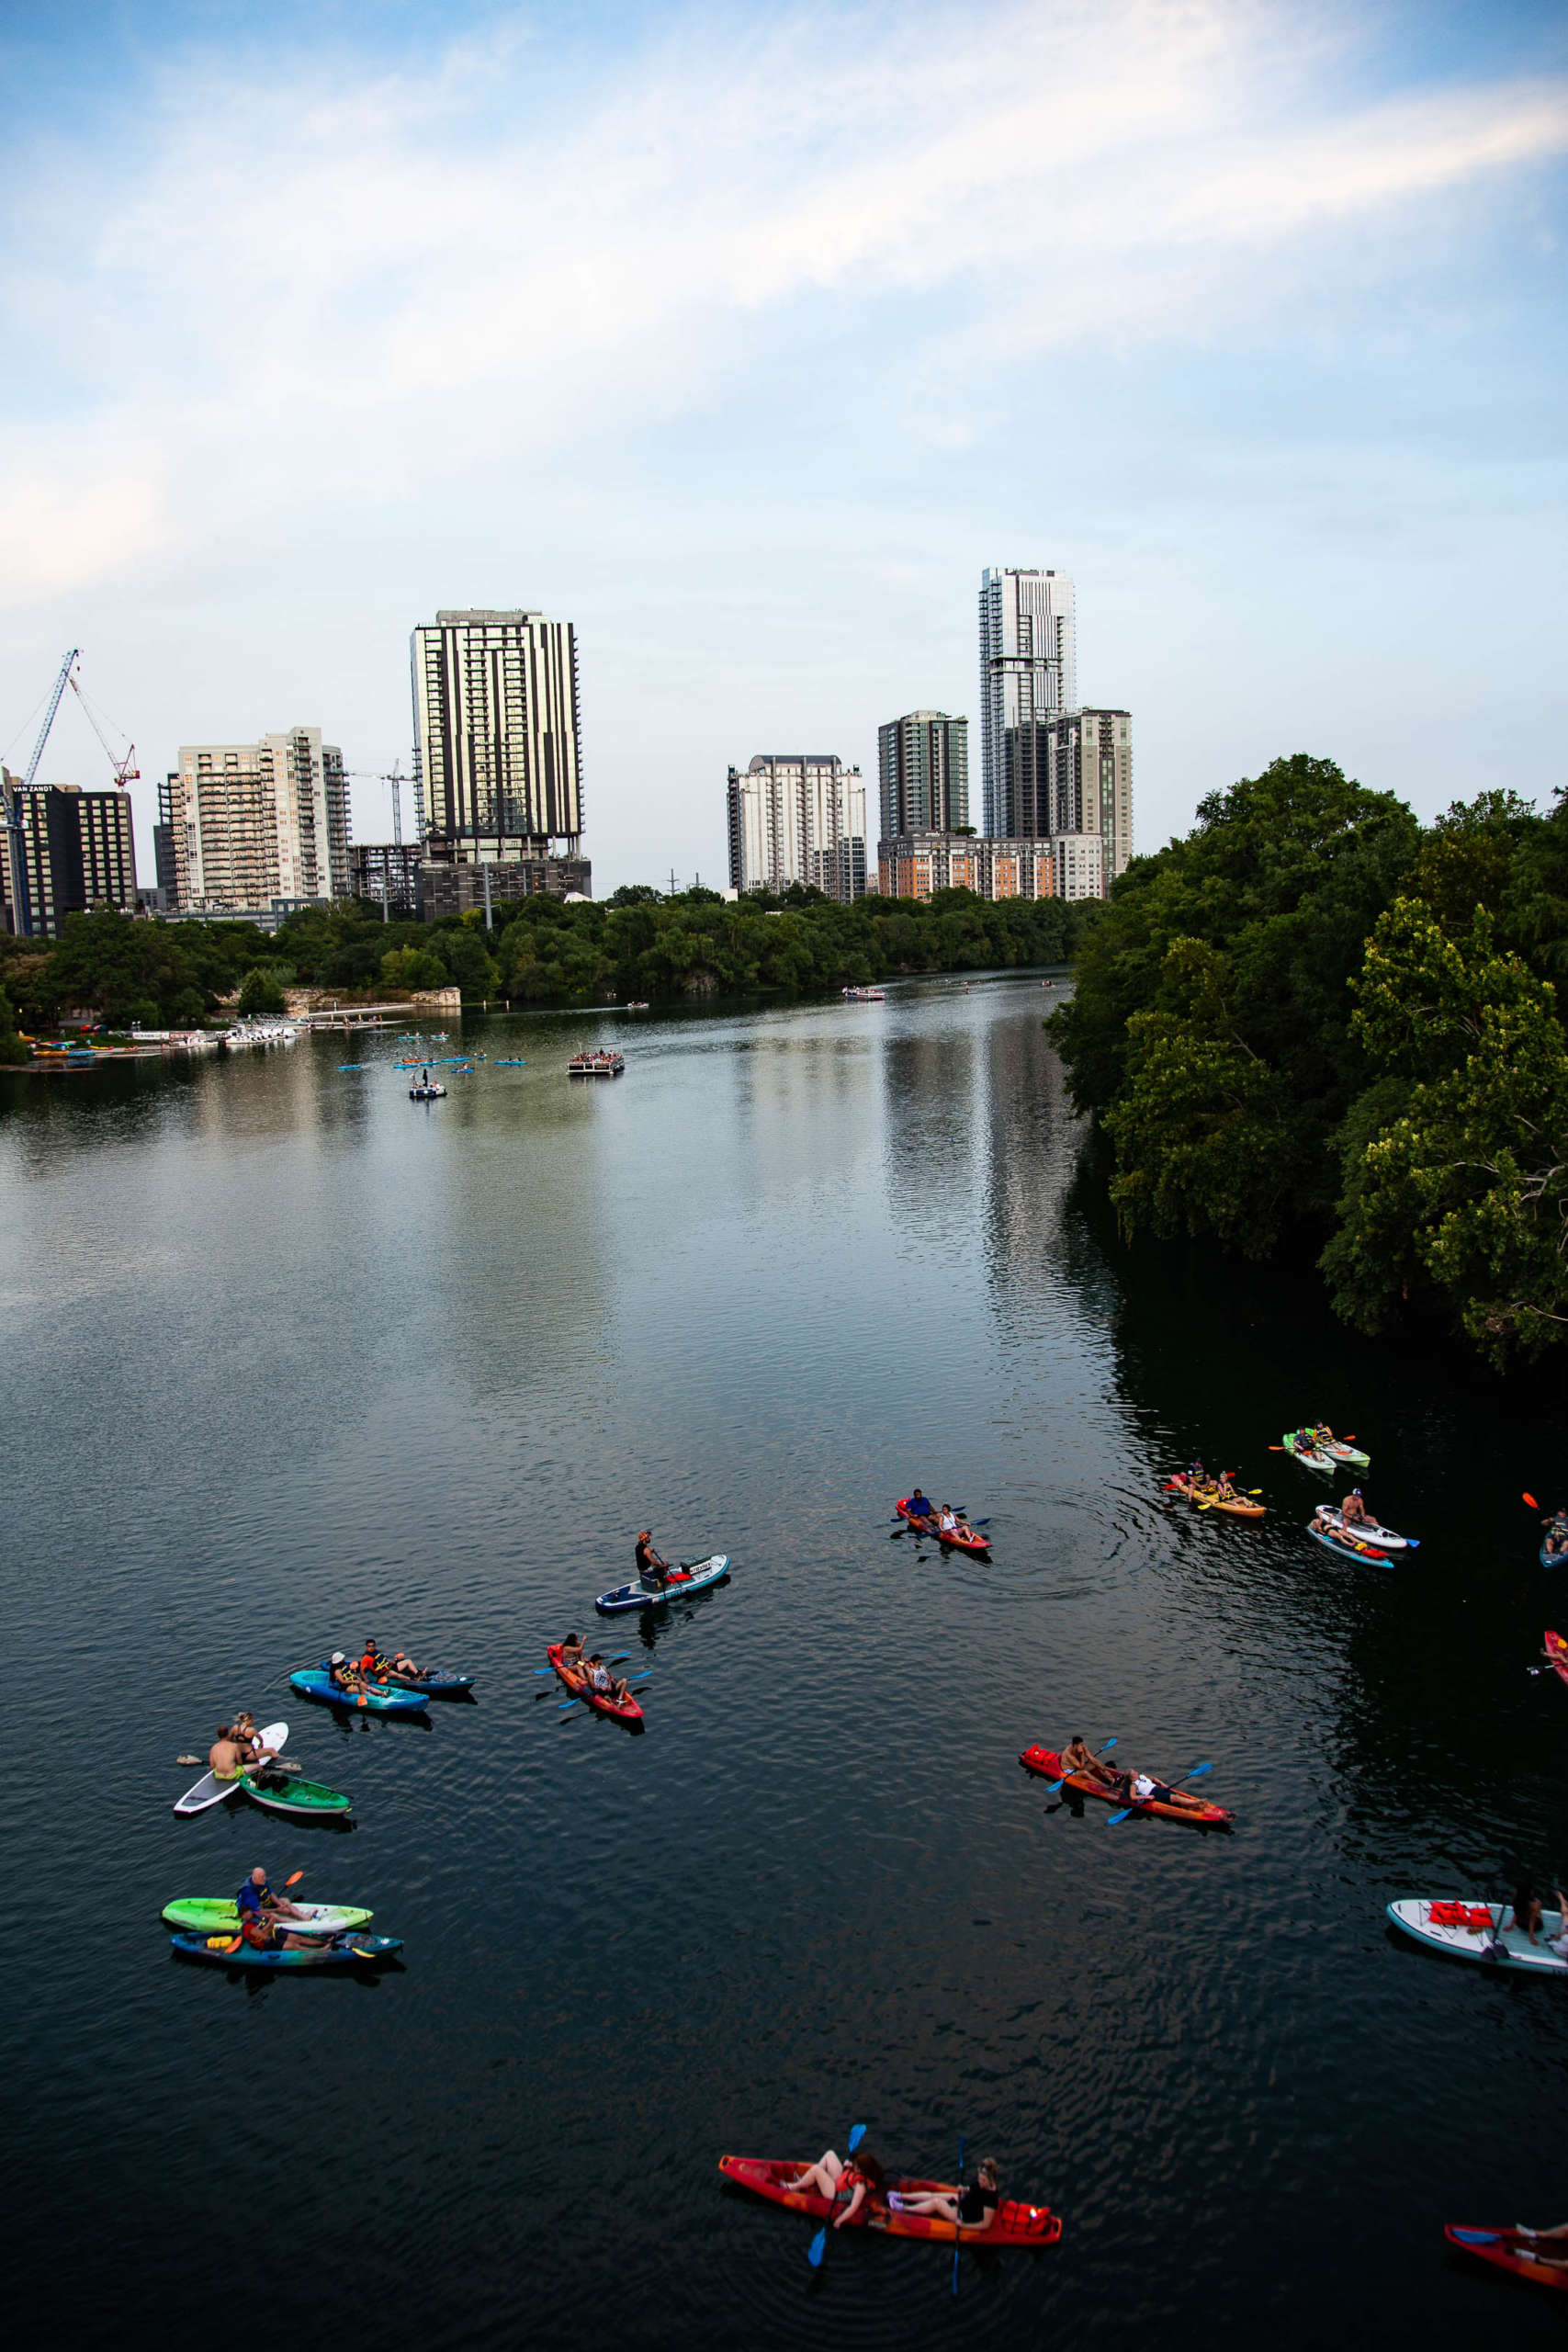 A group of people set out together in colorful kayaks on a river lined with trees. City buildings are visible in the background, reflecting on the water. The sky is bright blue with streaks of clouds.